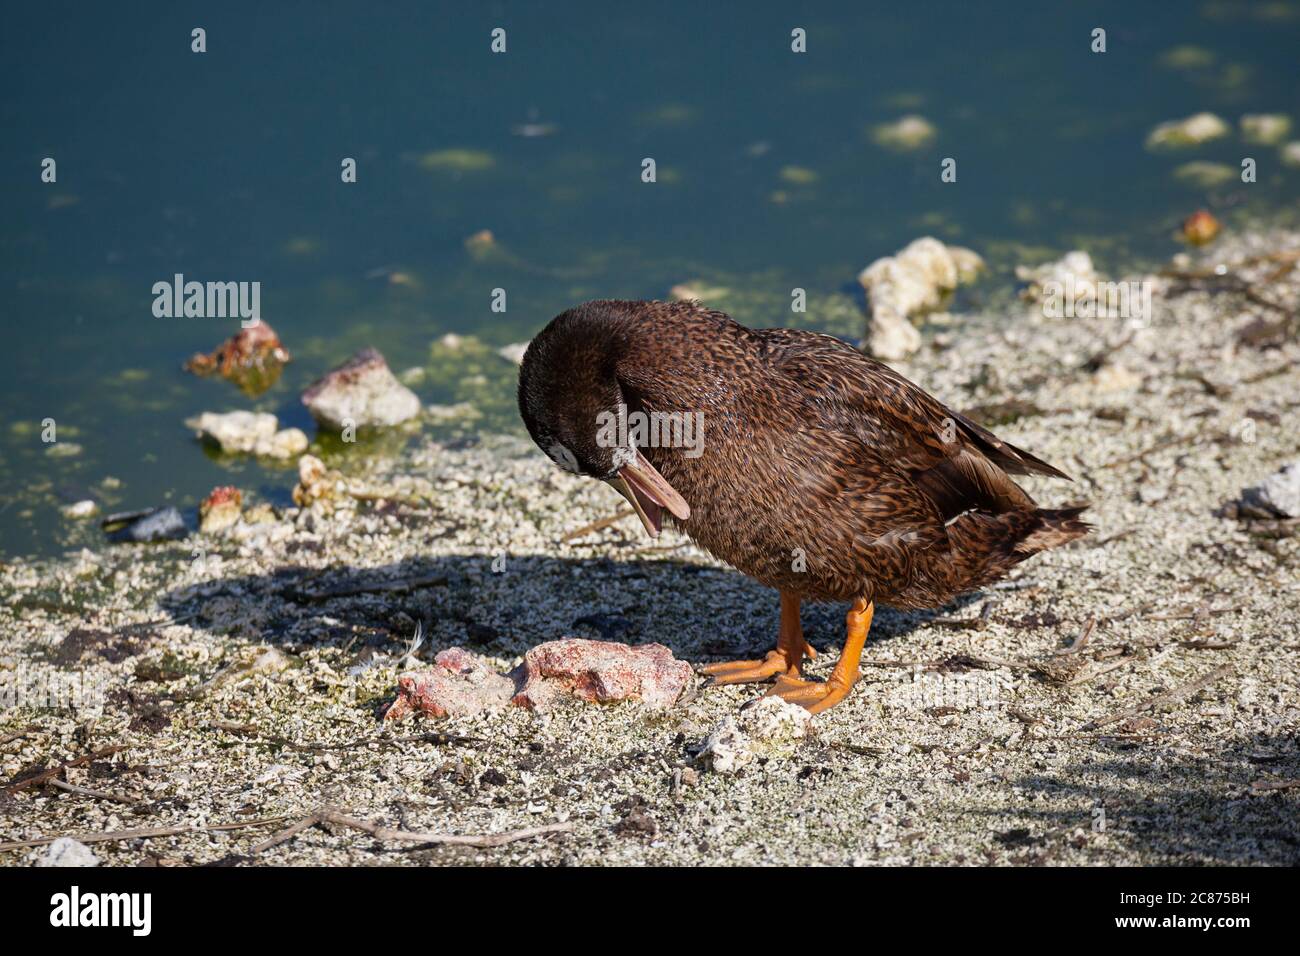 Laysan duck or Laysan teal, Anas laysanensis,  ( Critically Endangered Species ), preening, Eastern Island, Midway Atoll National Wildlife Refuge, USA Stock Photo